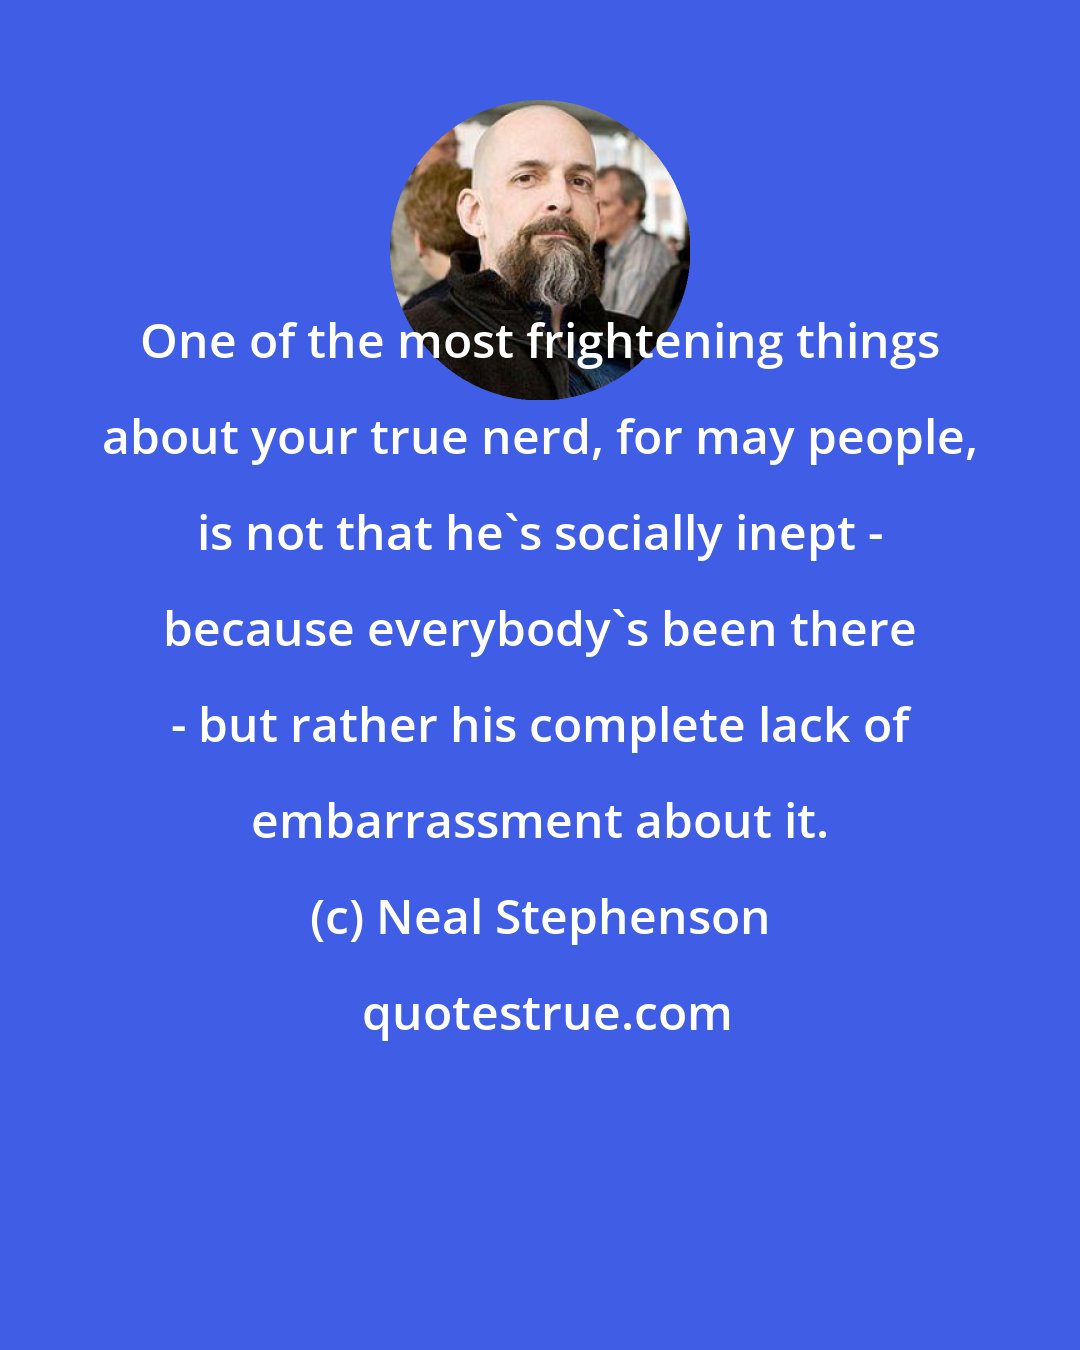 Neal Stephenson: One of the most frightening things about your true nerd, for may people, is not that he's socially inept - because everybody's been there - but rather his complete lack of embarrassment about it.